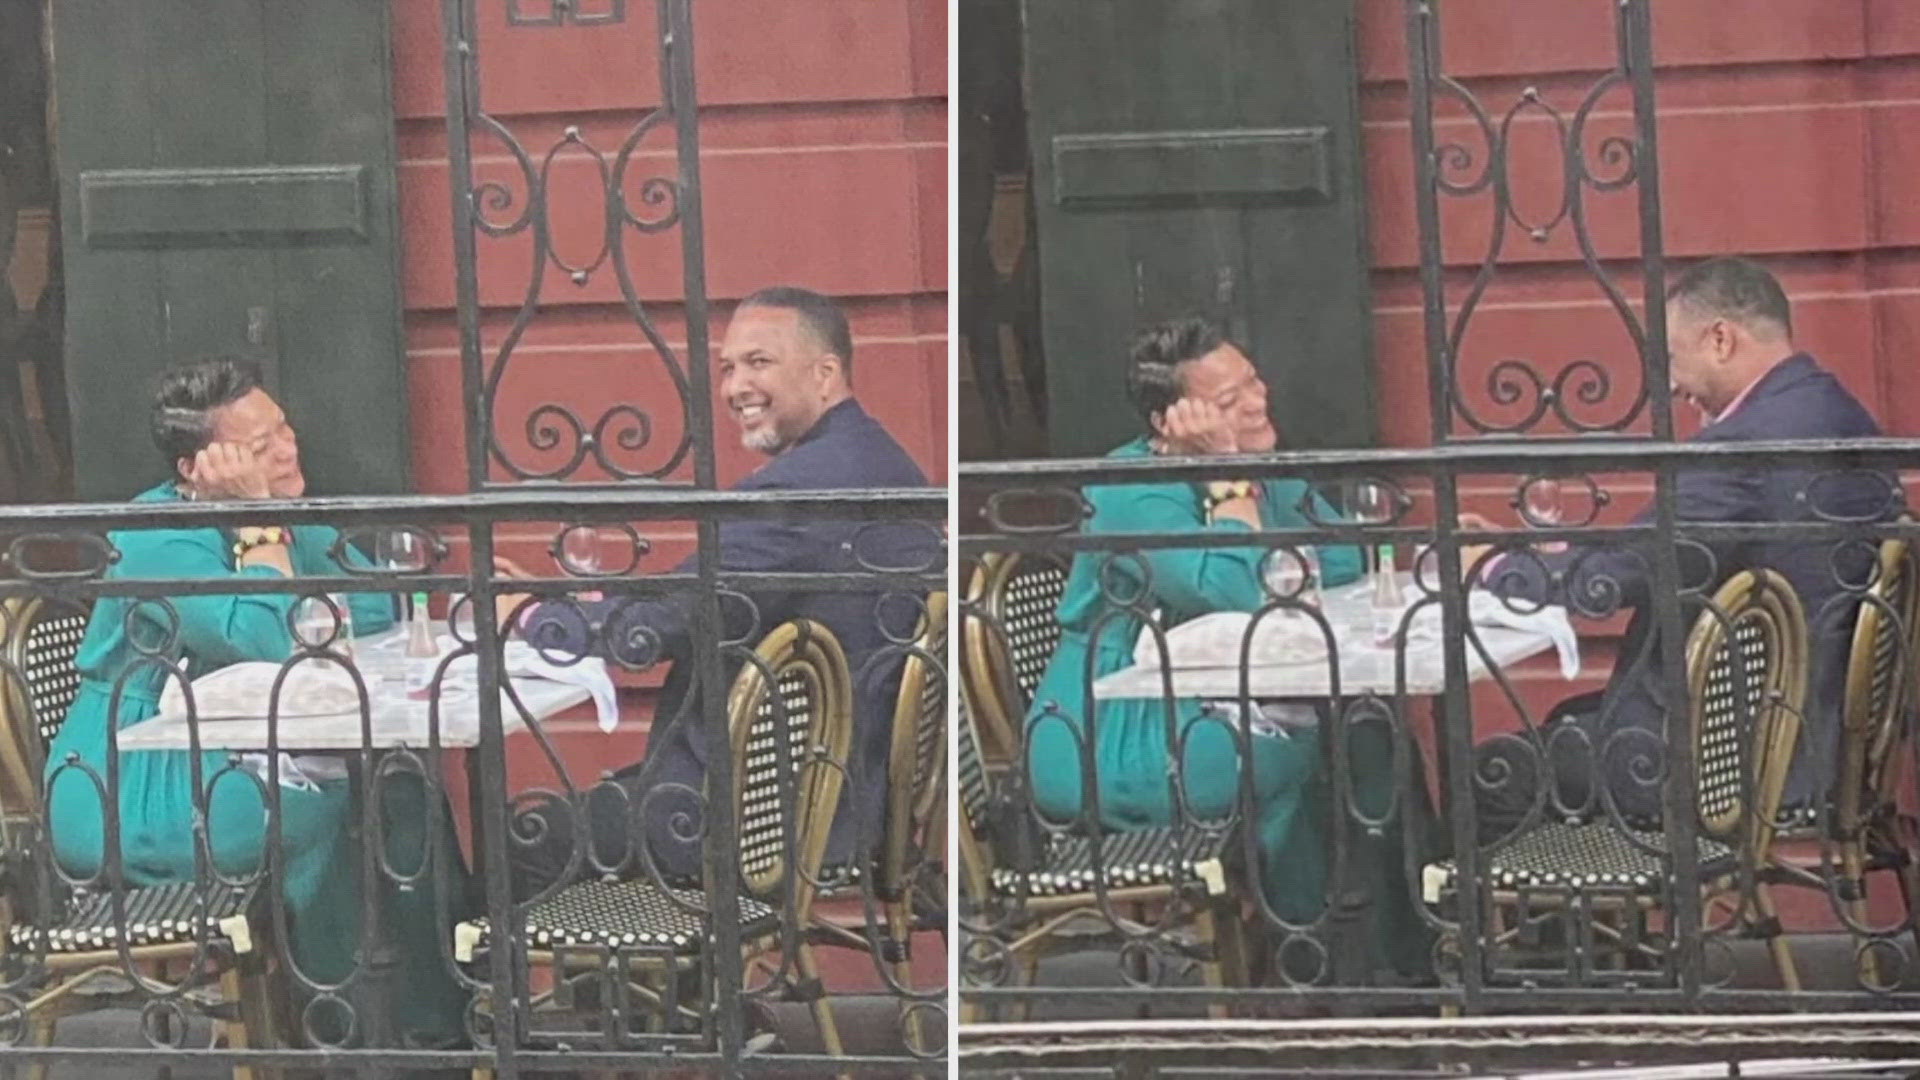 The photo clearly shows Mayor Cantrell and Jeffrey Vappie seated at a balcony table of a French Quarter restaurant.